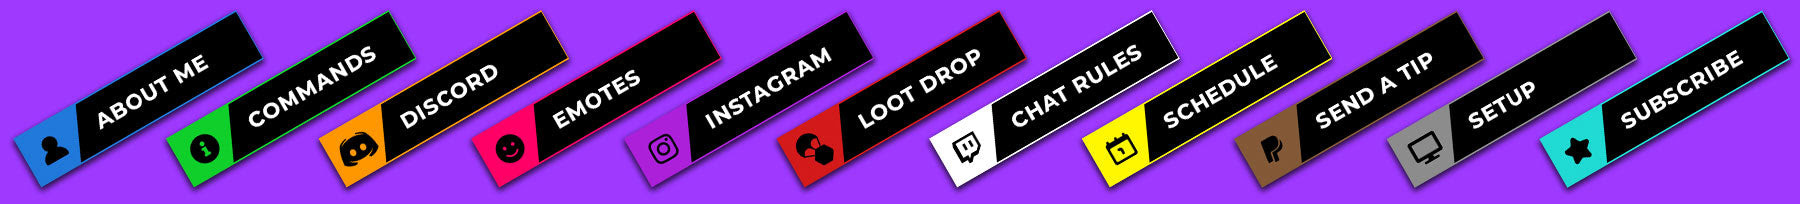 FREE Twitch Panels package created by Loot Drop Graphics